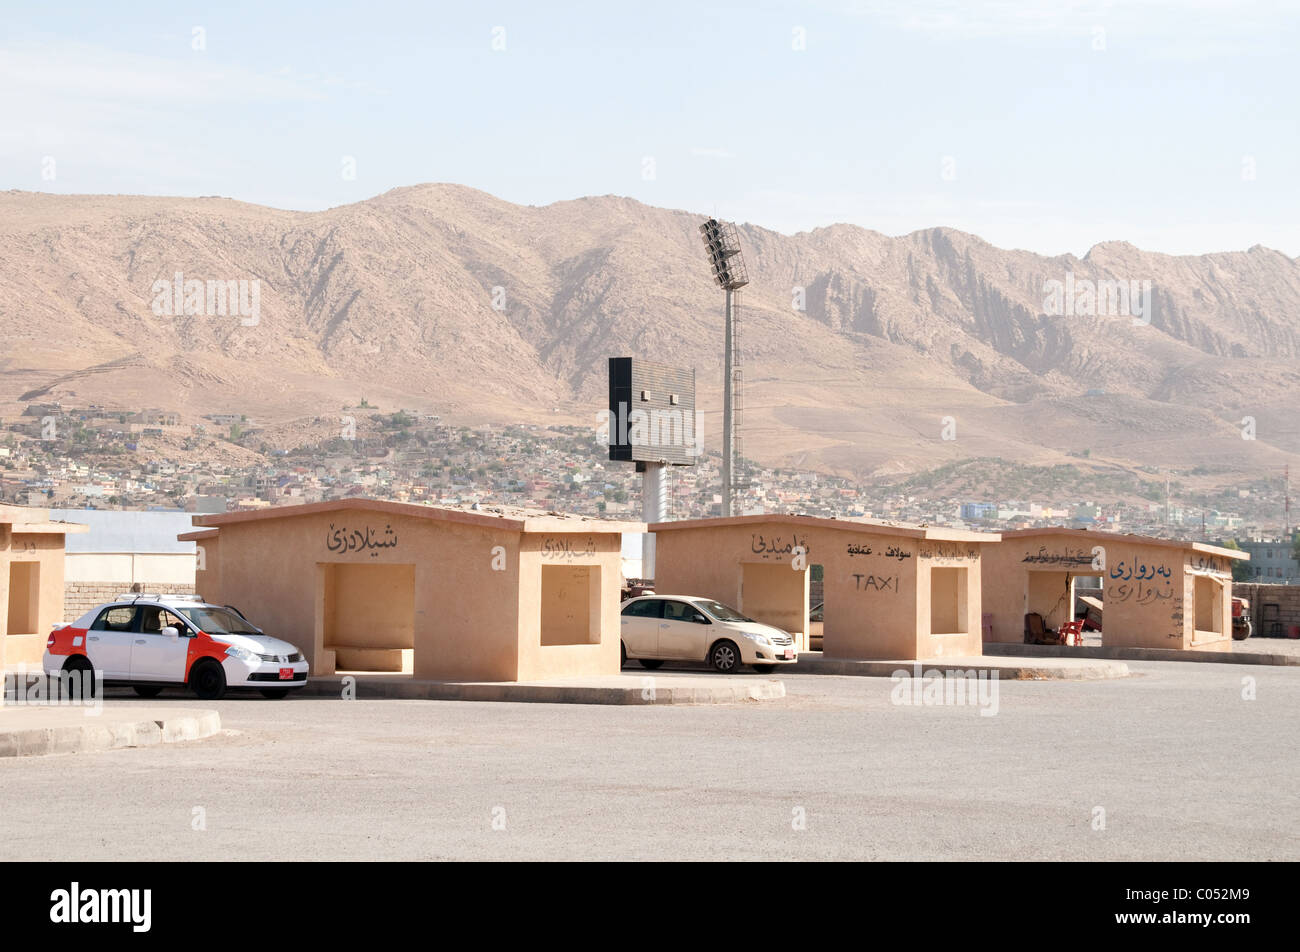 The main intercity taxi station and depot in the Iraqi city of Duhok, in the autonomous Kurdistan region of northern Iraq. Stock Photo